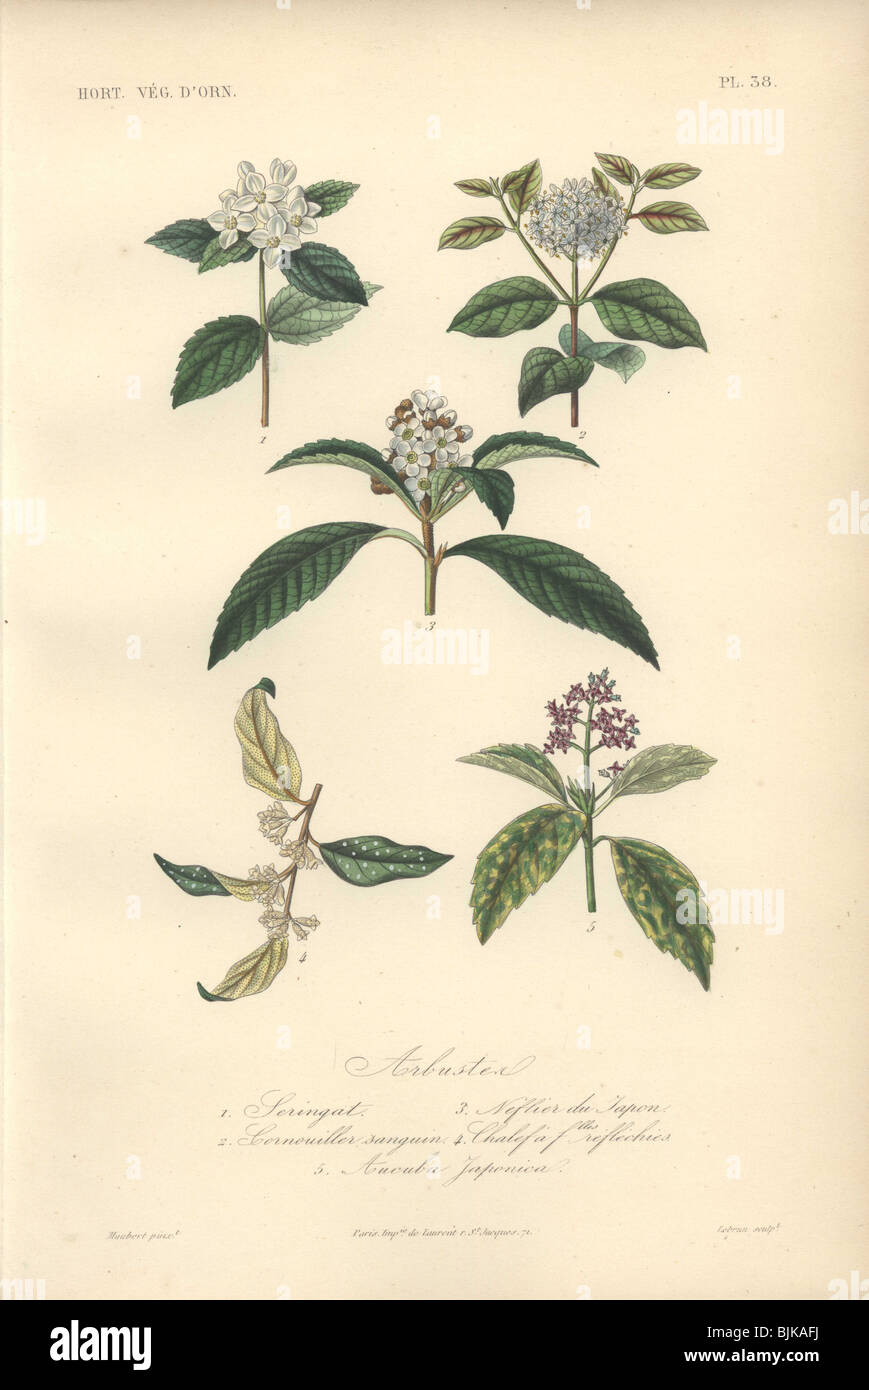 Decorative botanical print with rubber tree, dogwood, loquat and spotted laurel from Herincq's 'Regne Vegetal' (1865). Stock Photo